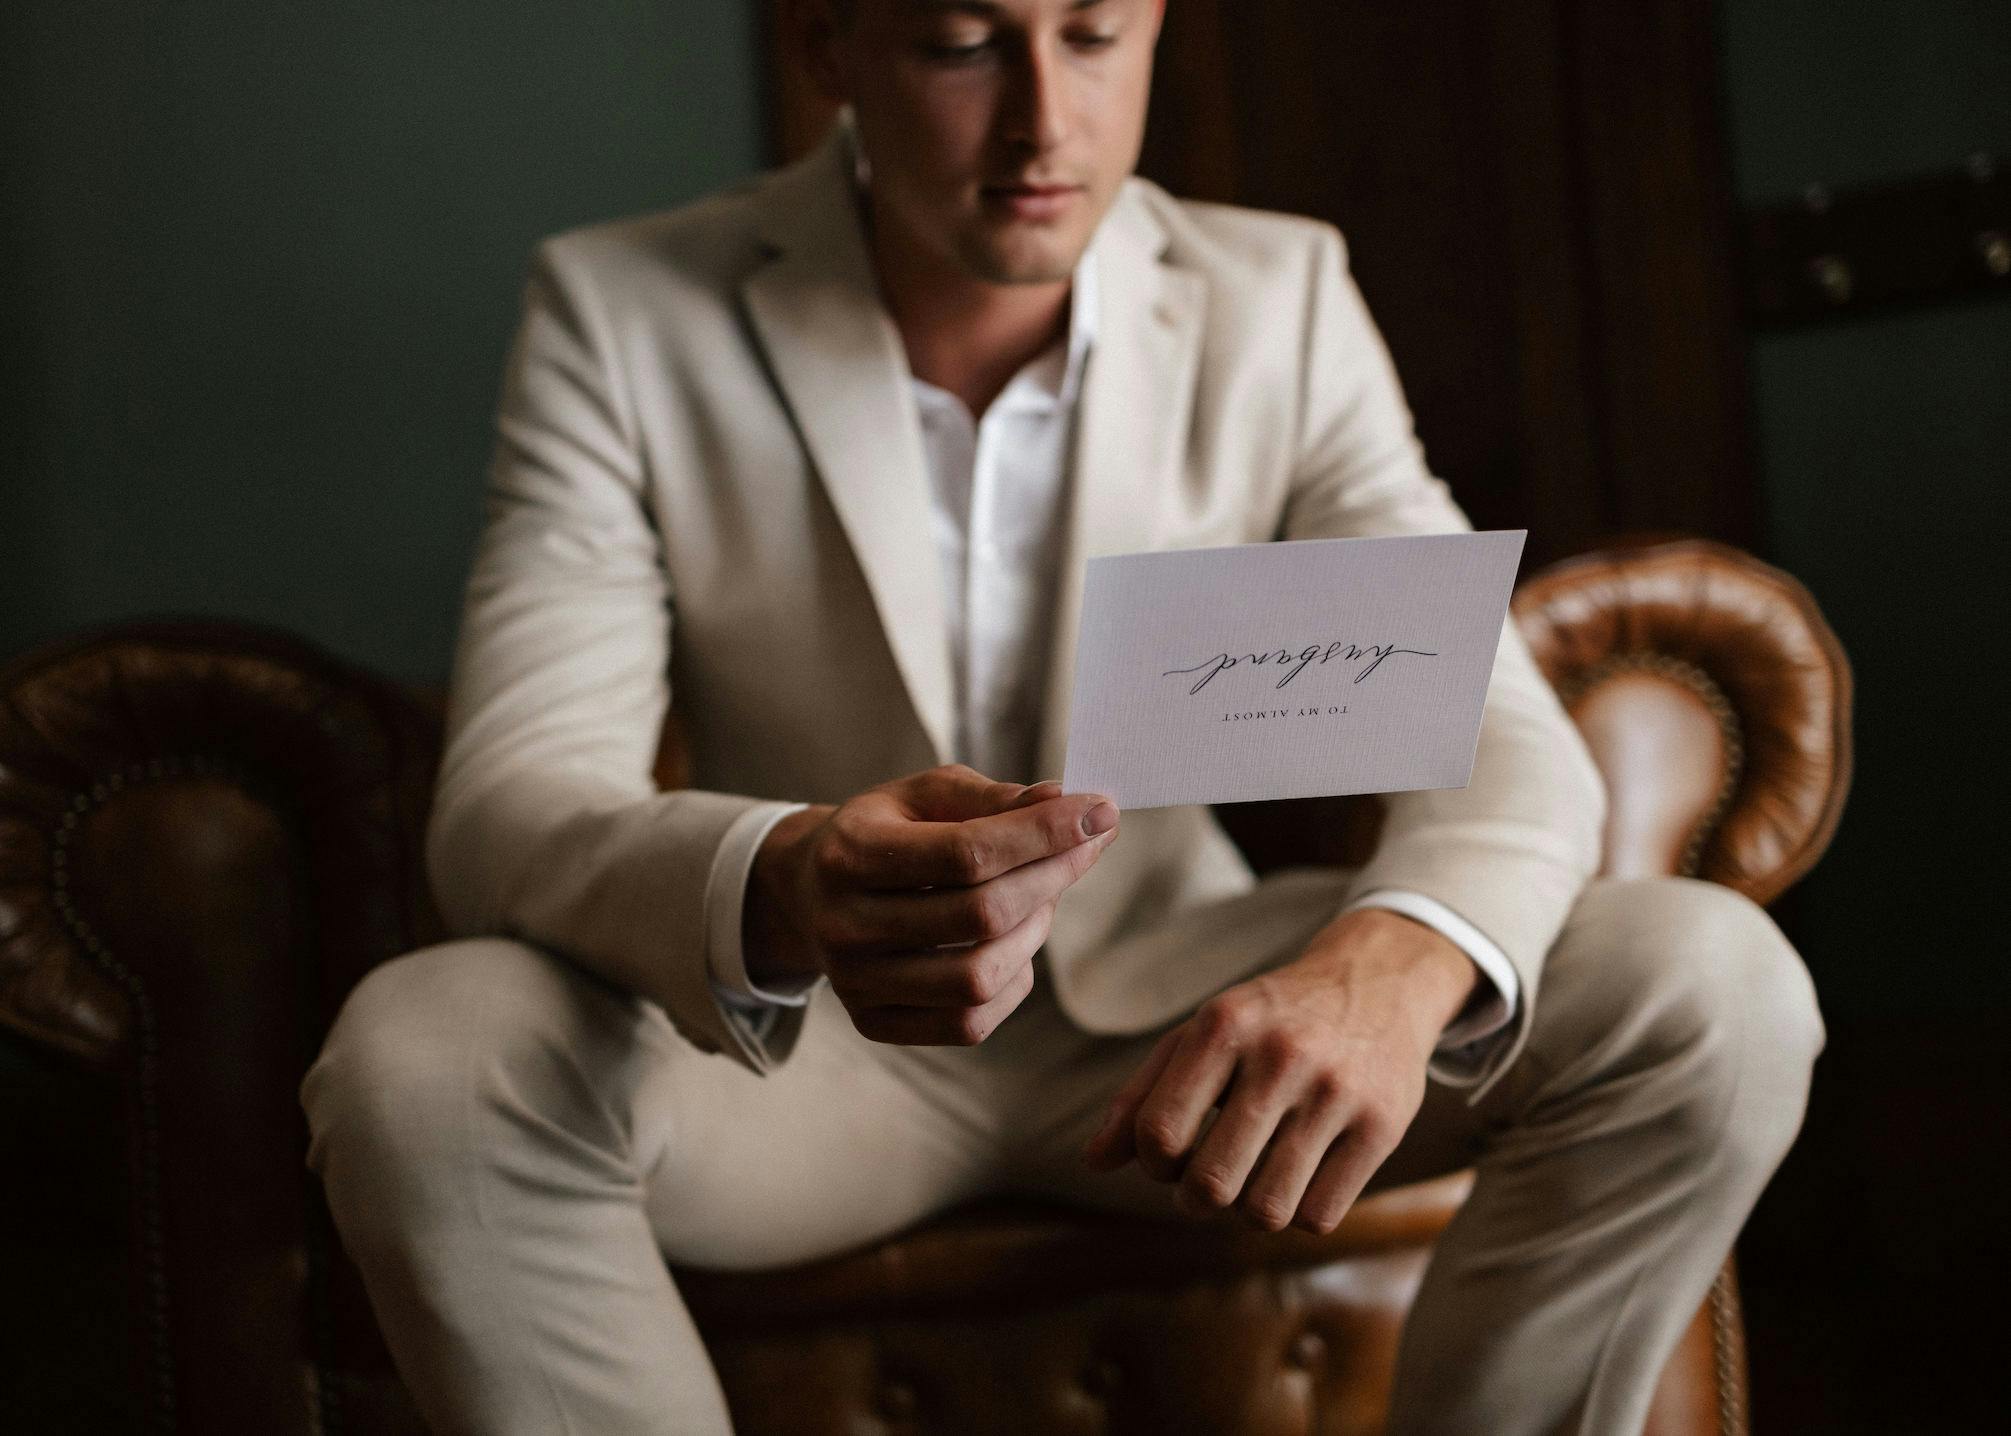 A person in a beige suit sits on a leather armchair, looking at a white card in their hand. The text on the card reads "journey" with a date below it. The background is dark and slightly out of focus.